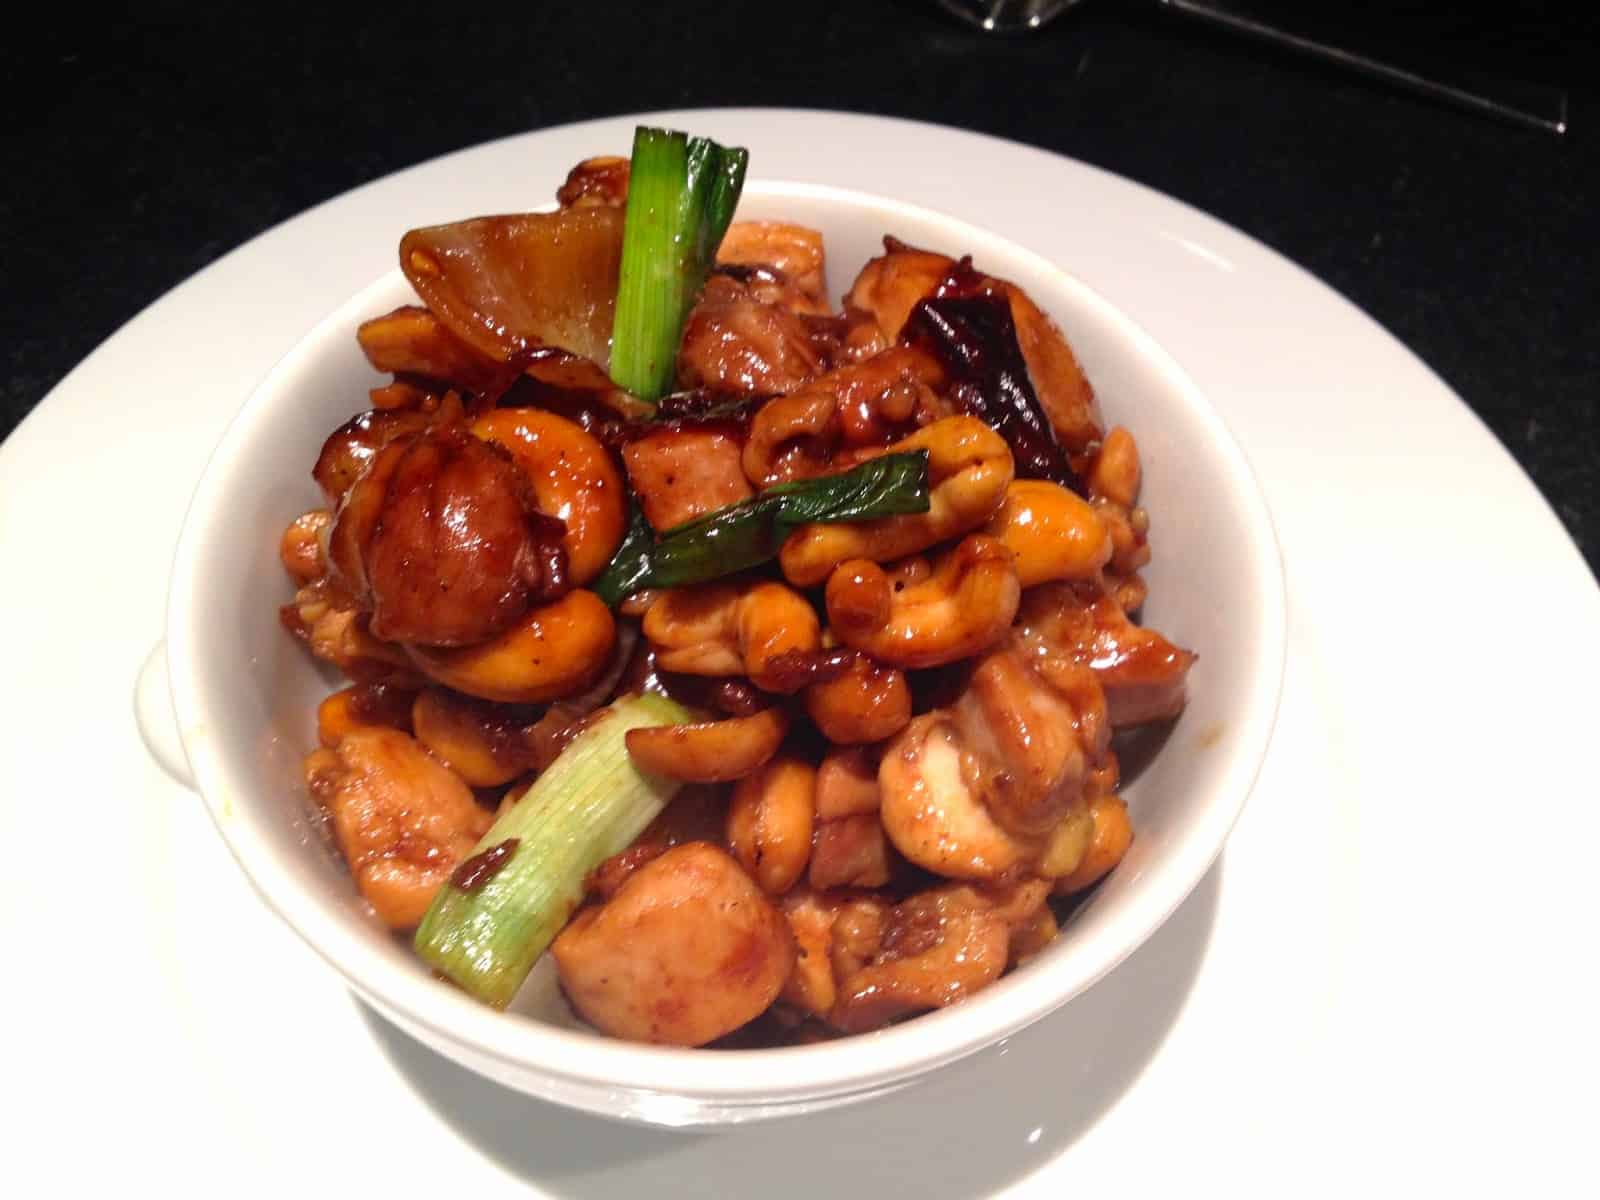 Spicy Chicken with Cashews from Bee Yin Low’s Rasa Malaysia